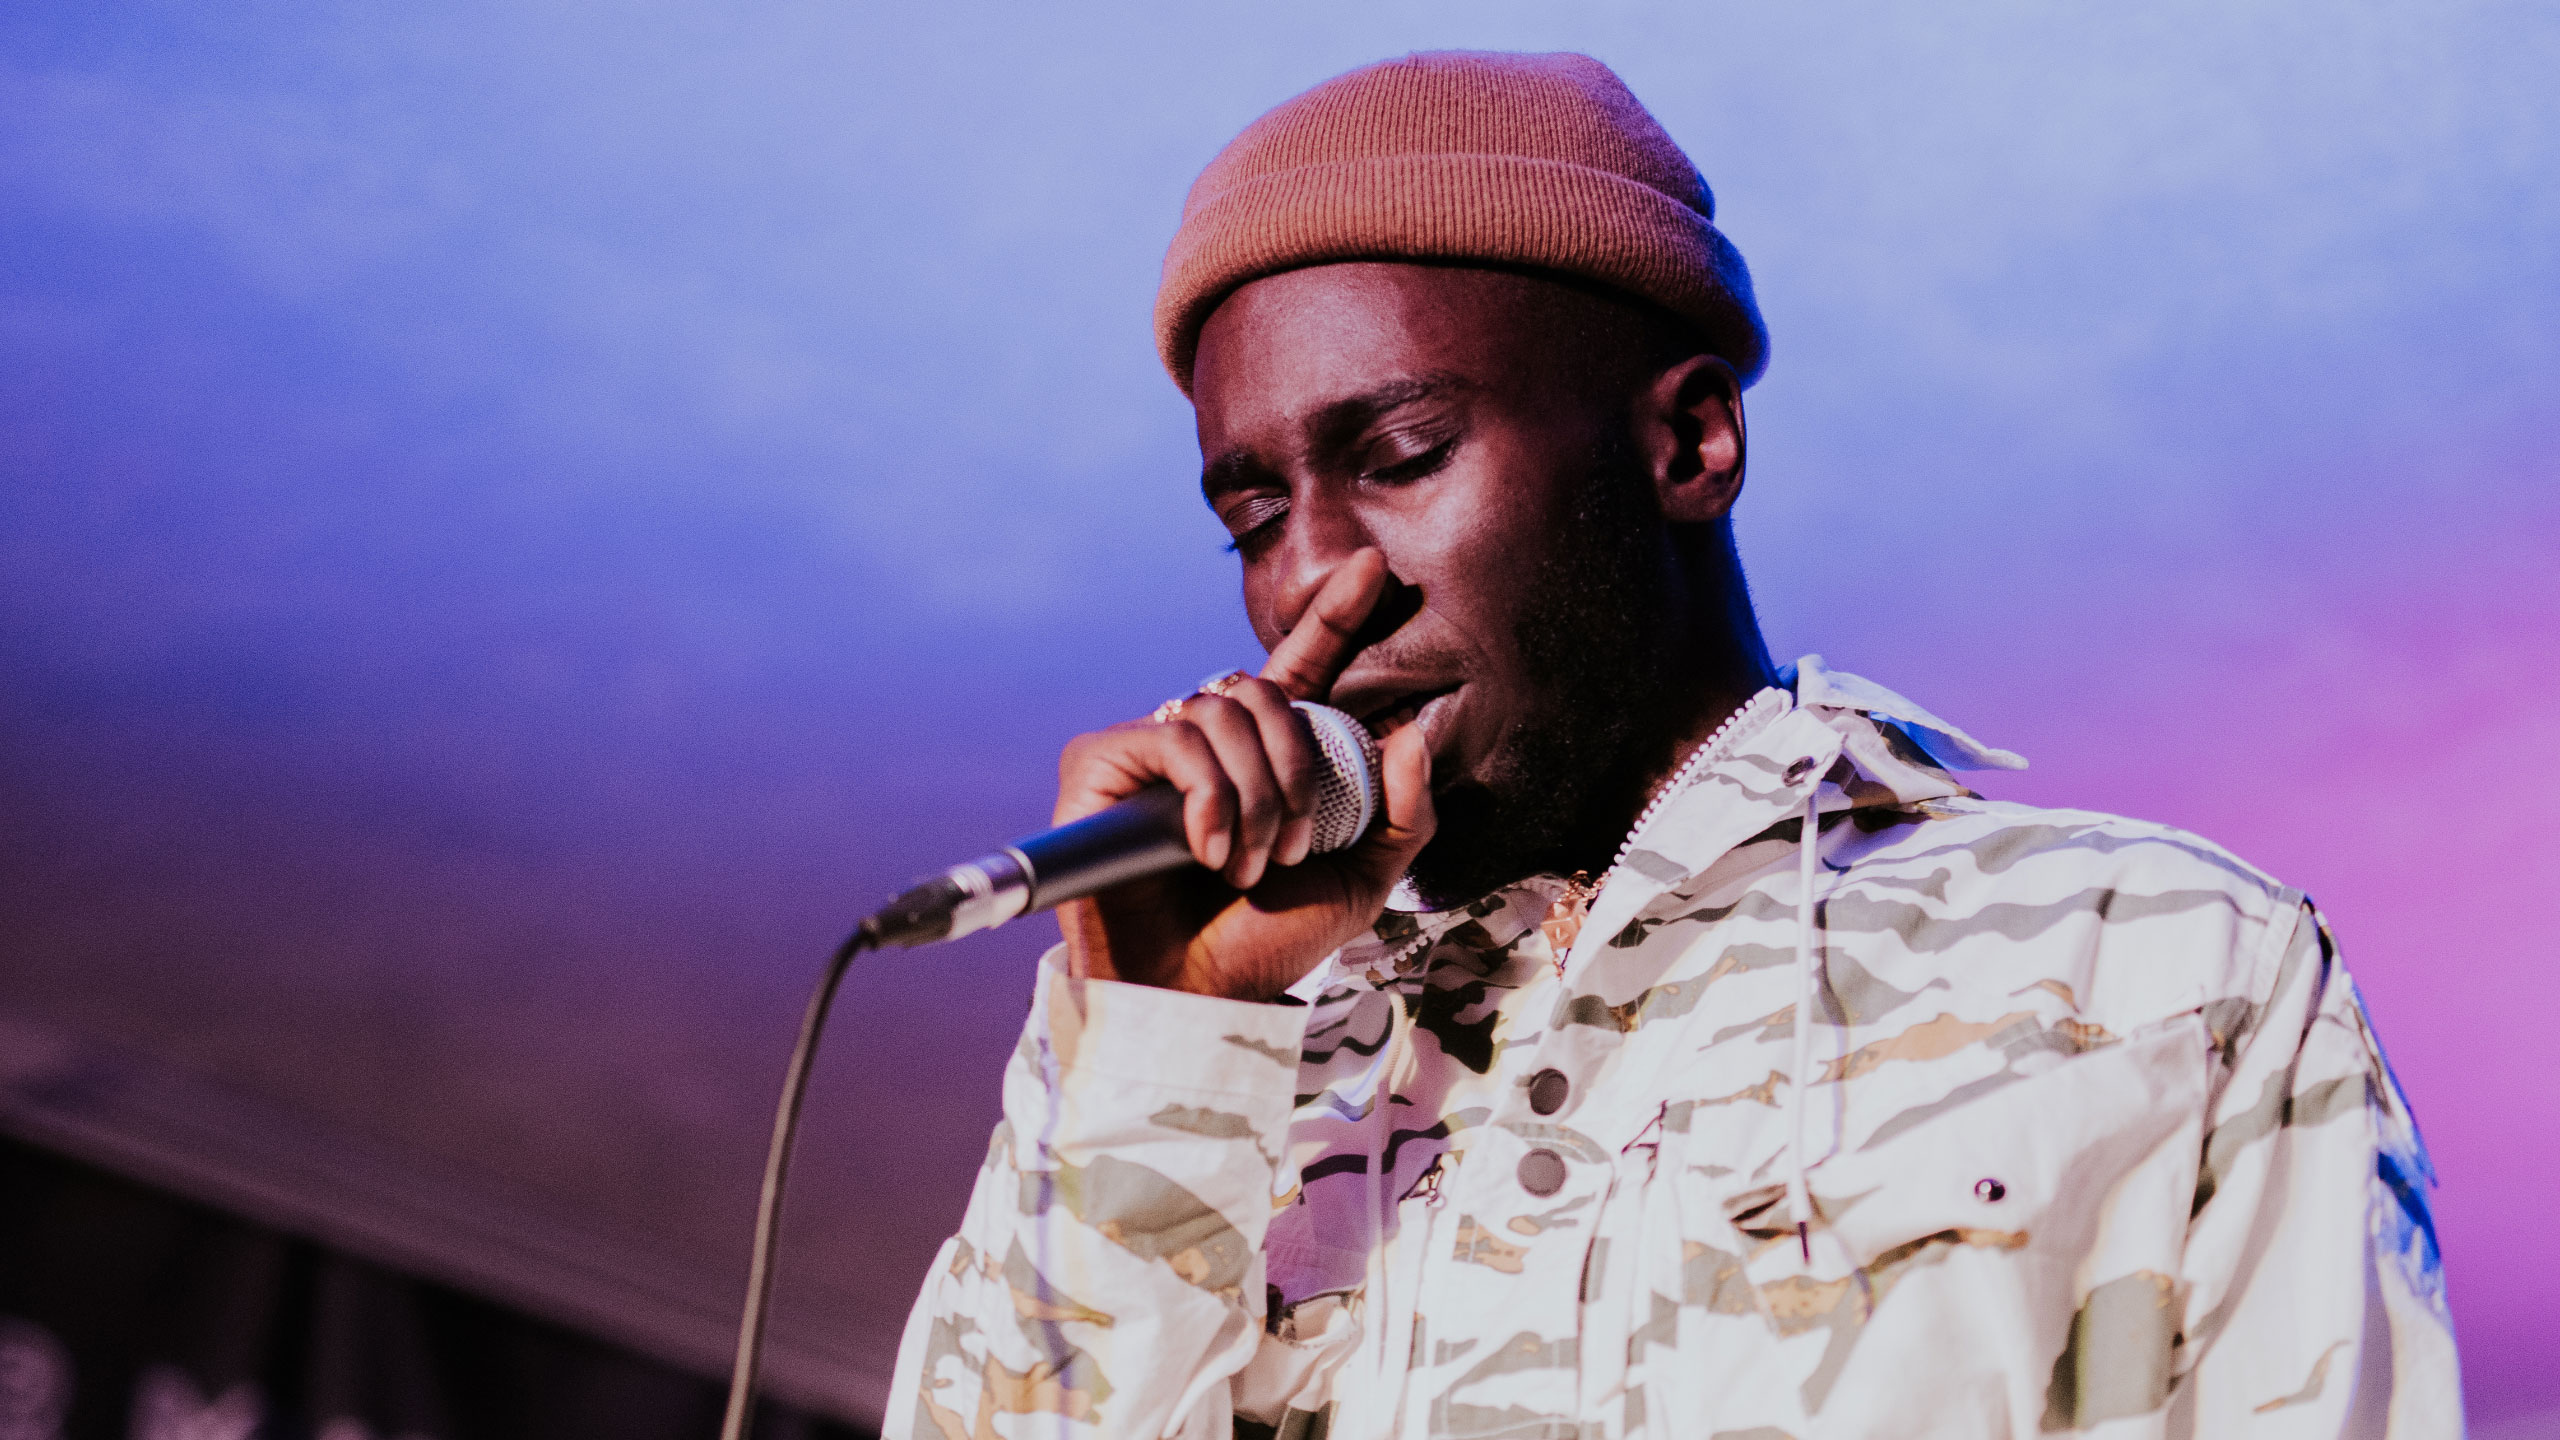 Kojey Radical in a beanie hat and camouflage jacket singing at PRS for Music Present